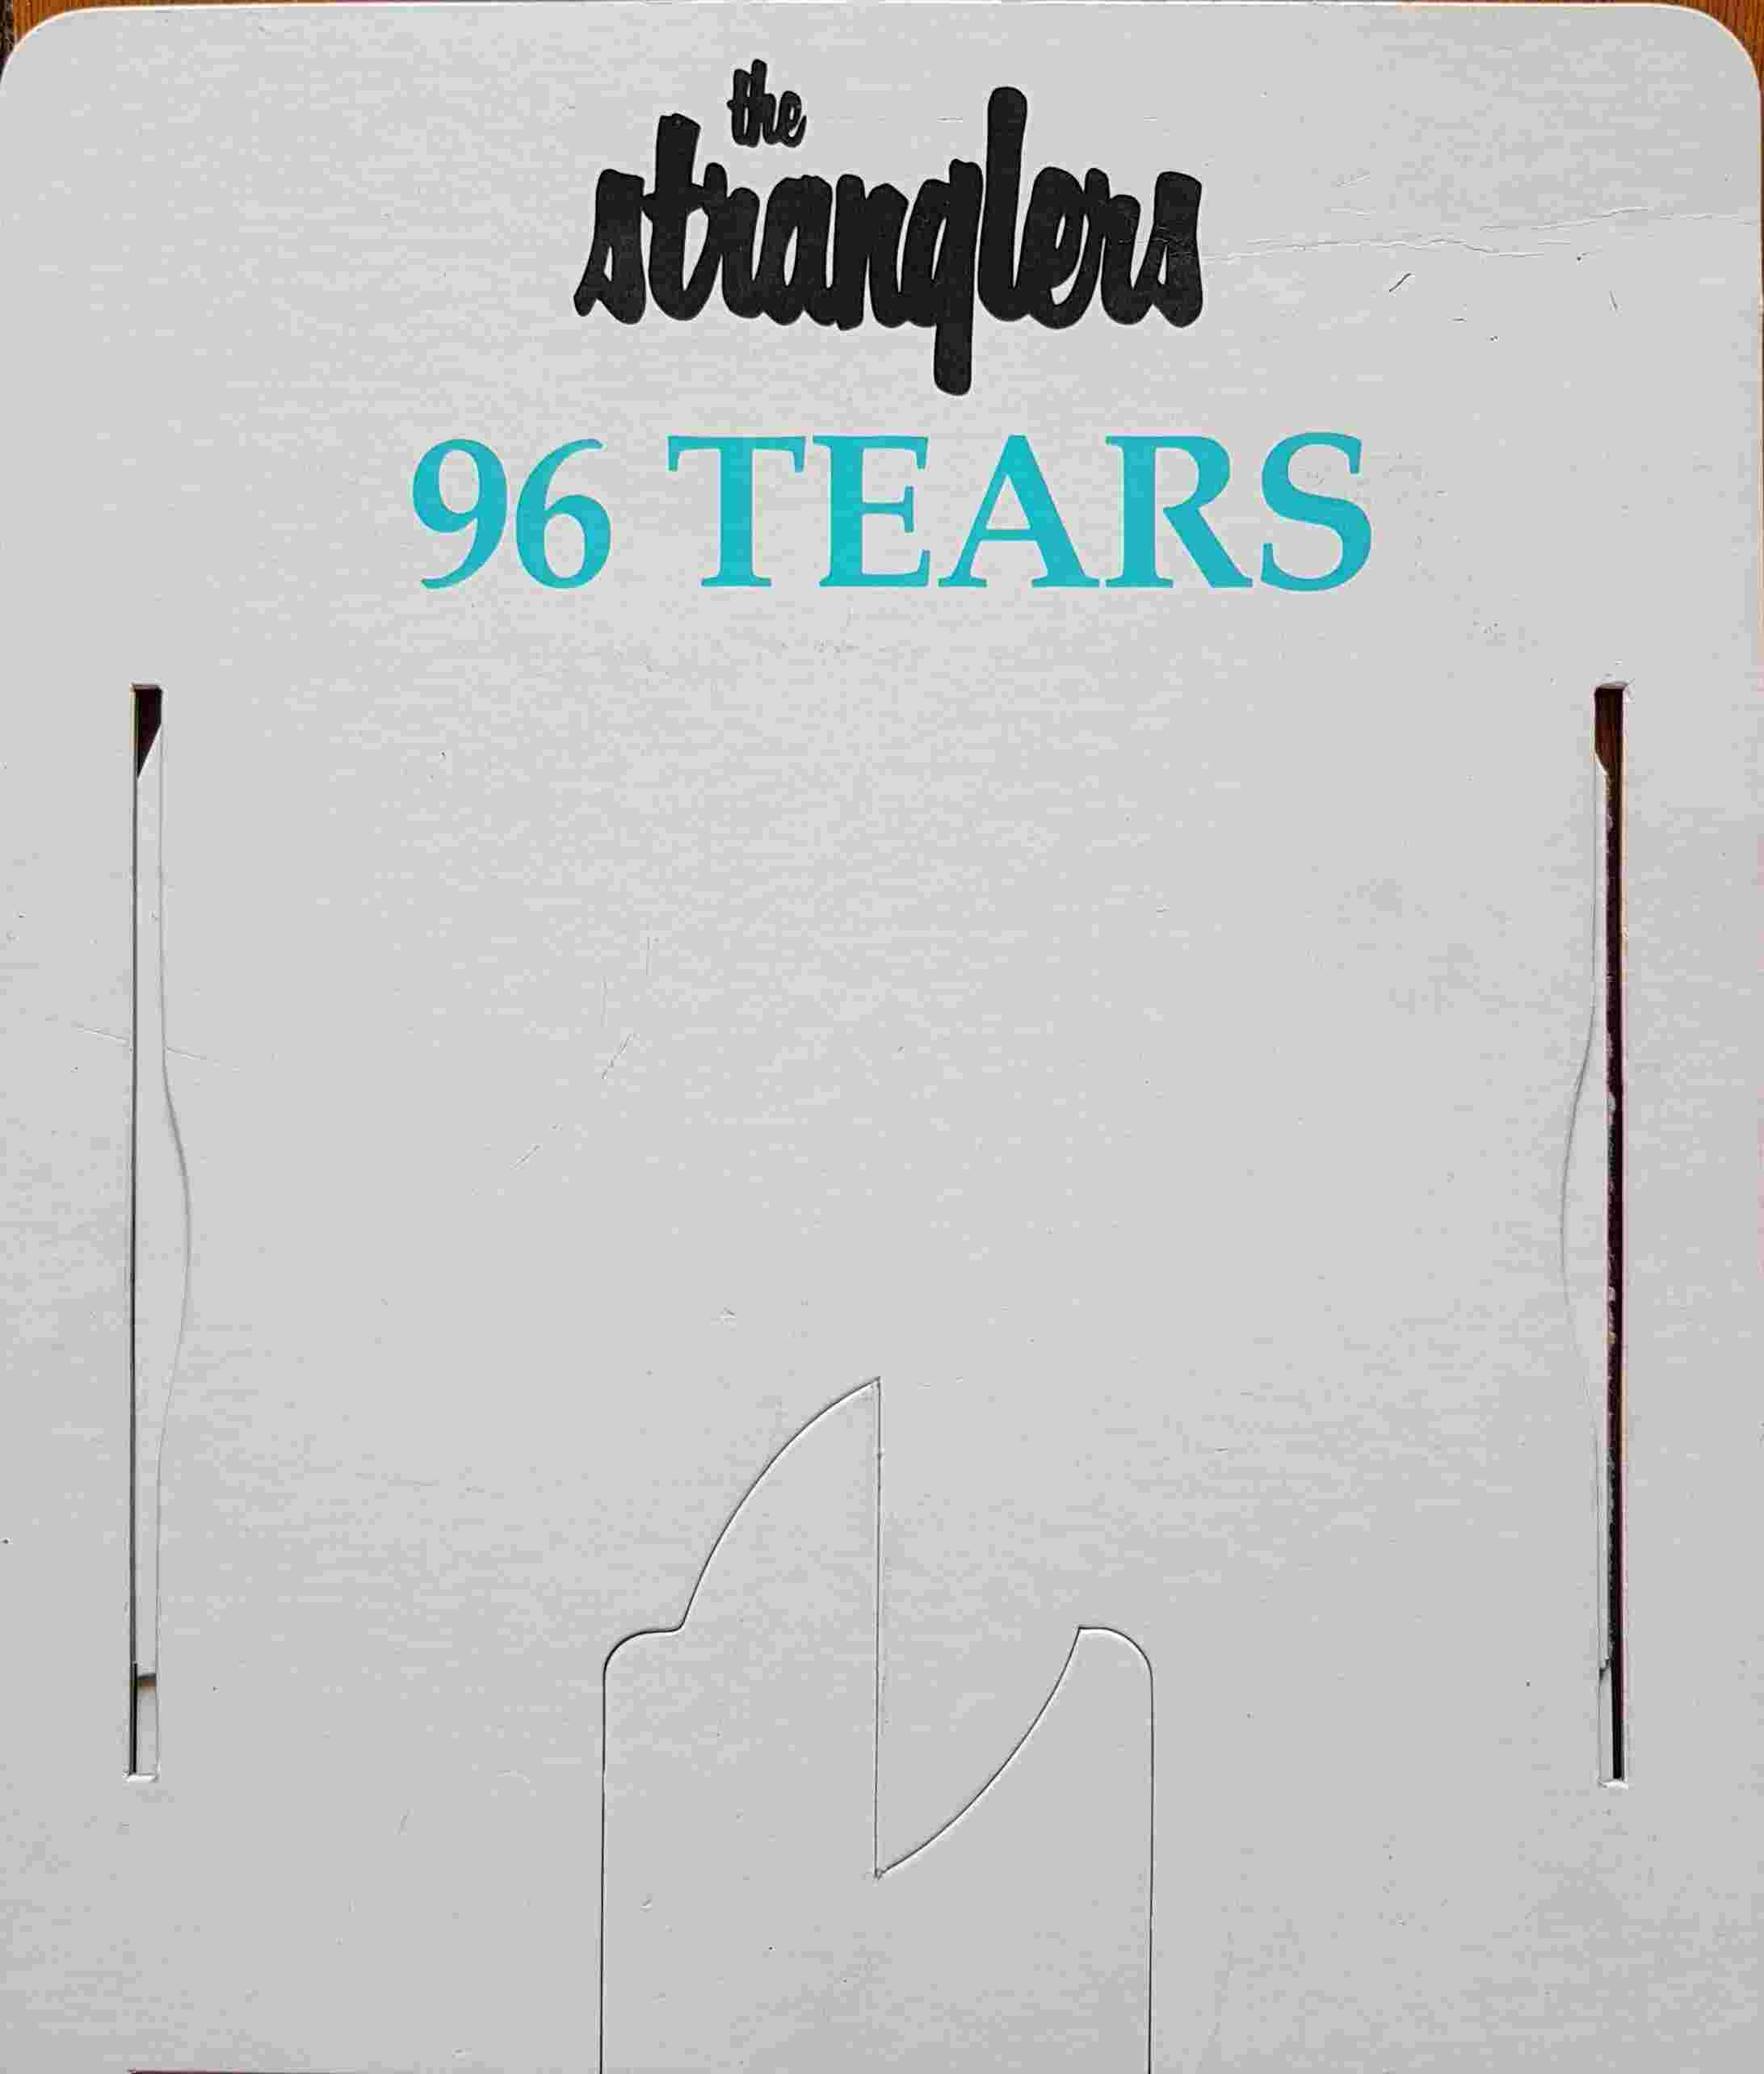 Picture of 96T_SH 96 tears by artist The Stranglers from The Stranglers